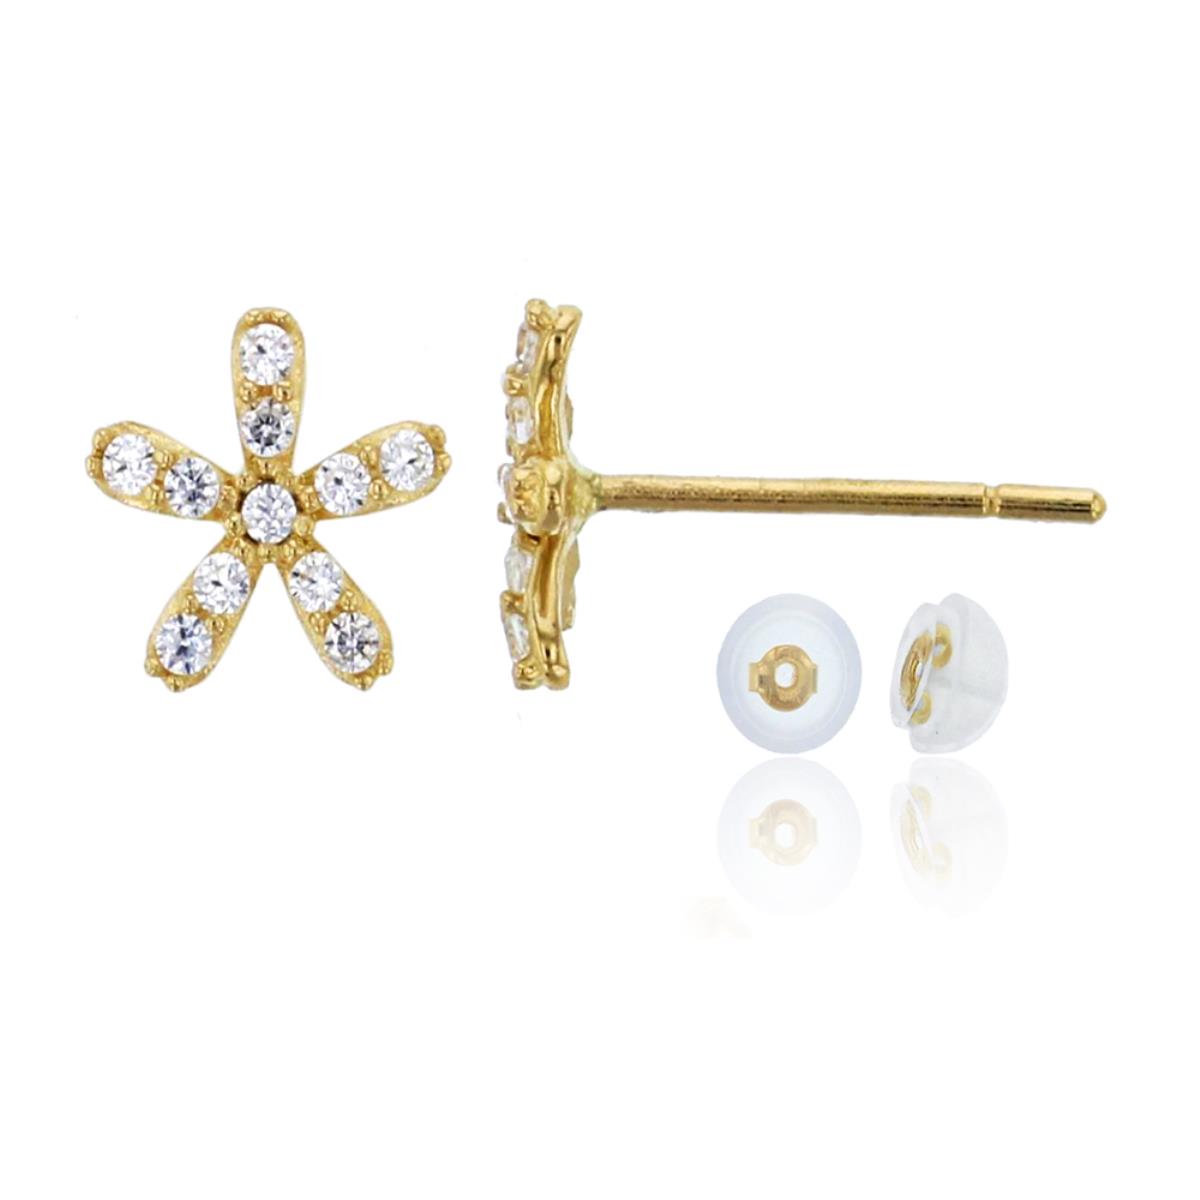 10K Yellow Gold Mciropave 6mm Daisy Flower Stud & 10K Silicone Back